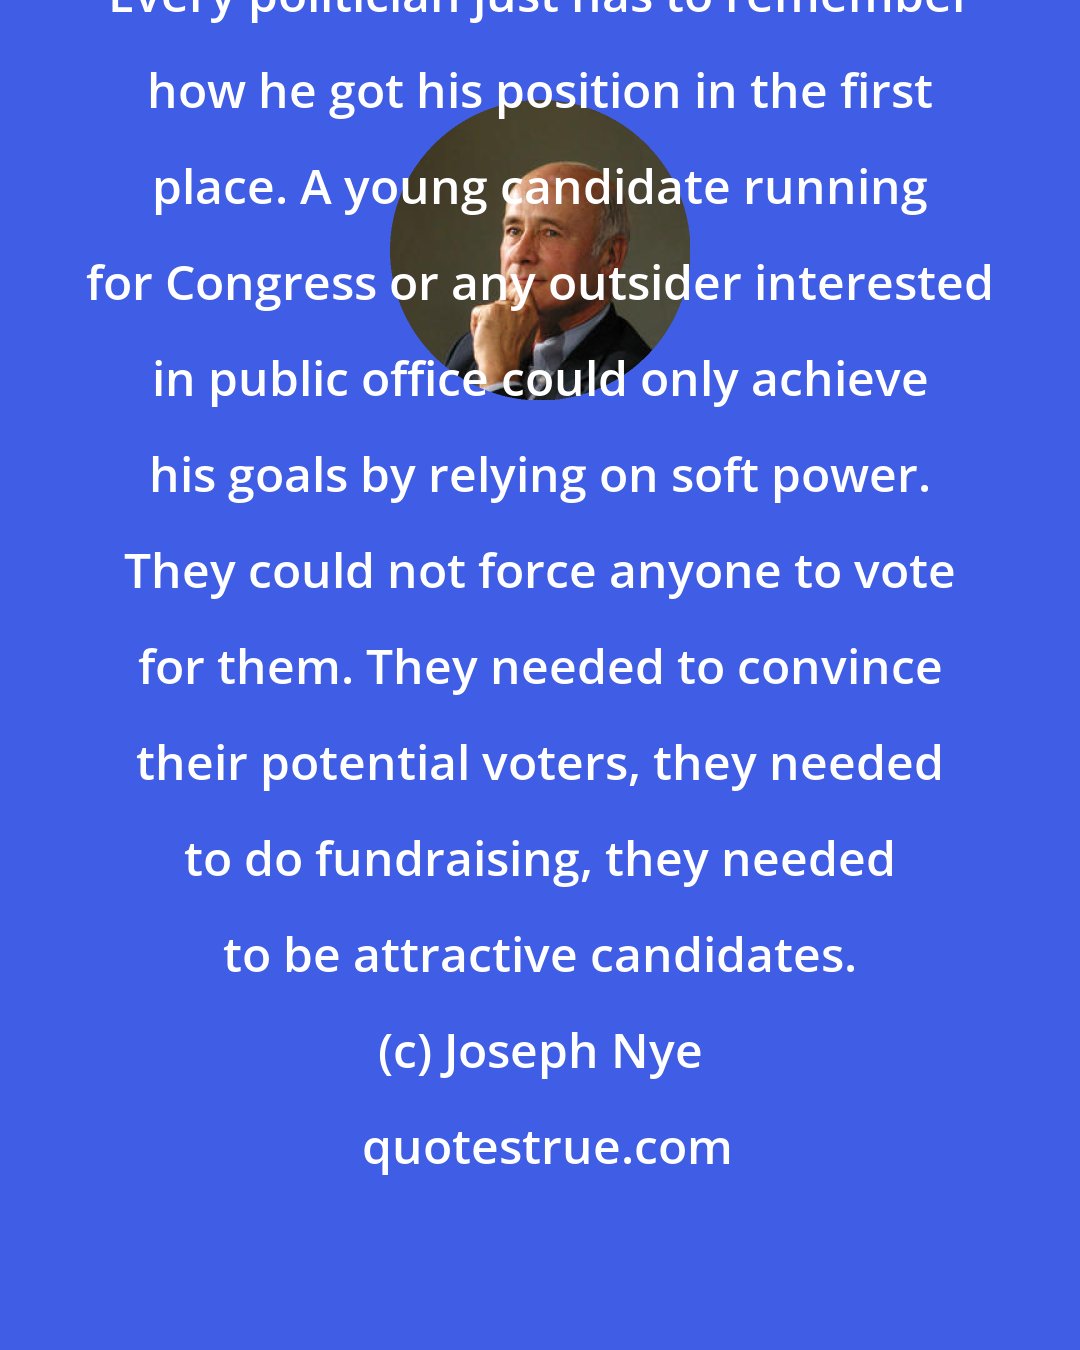 Joseph Nye: Every politician just has to remember how he got his position in the first place. A young candidate running for Congress or any outsider interested in public office could only achieve his goals by relying on soft power. They could not force anyone to vote for them. They needed to convince their potential voters, they needed to do fundraising, they needed to be attractive candidates.